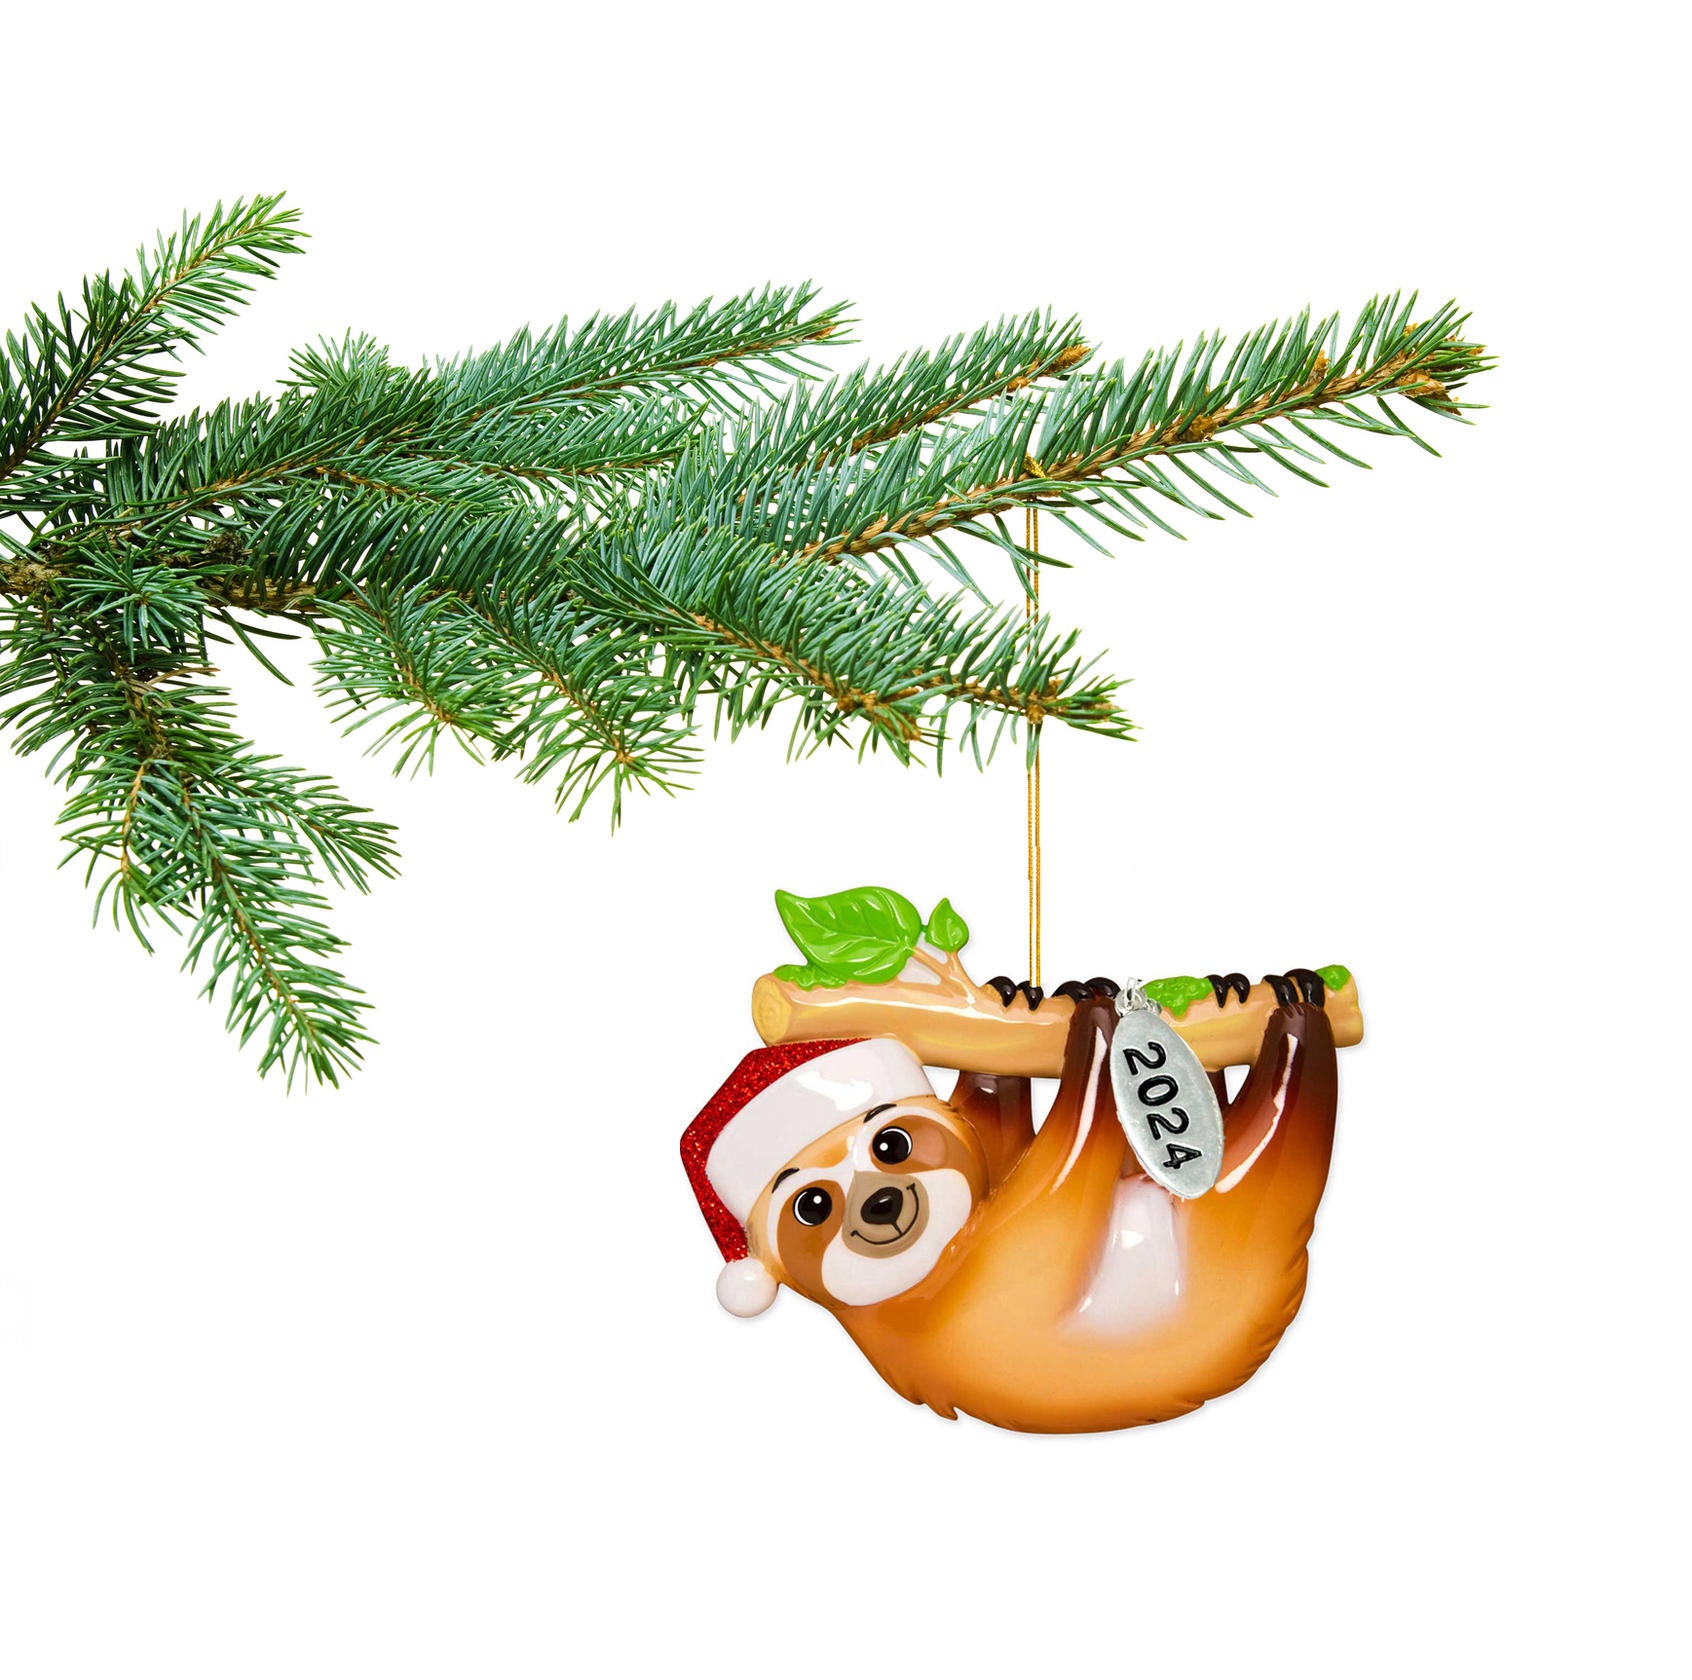 Sloth Ornament - Sloth Christmas Ornaments 2024 - Easy to Personalize - Comes in a Gift Box So It's Ready for Giving